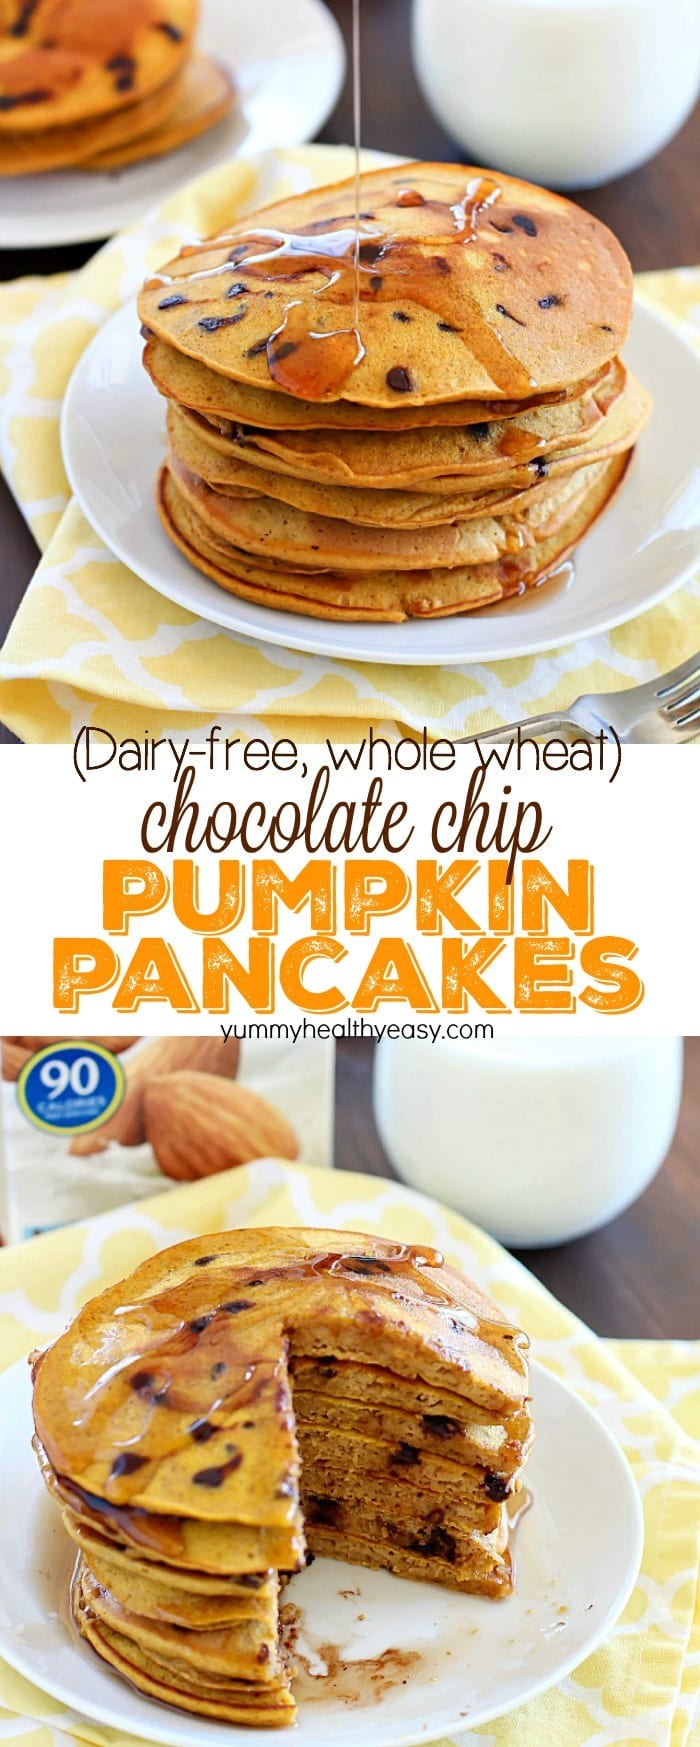 Flavorful pancakes full of pumpkin and chocolate chips that are also whole wheat and dairy-free! My family ate all of these and I had to make a second batch! AD